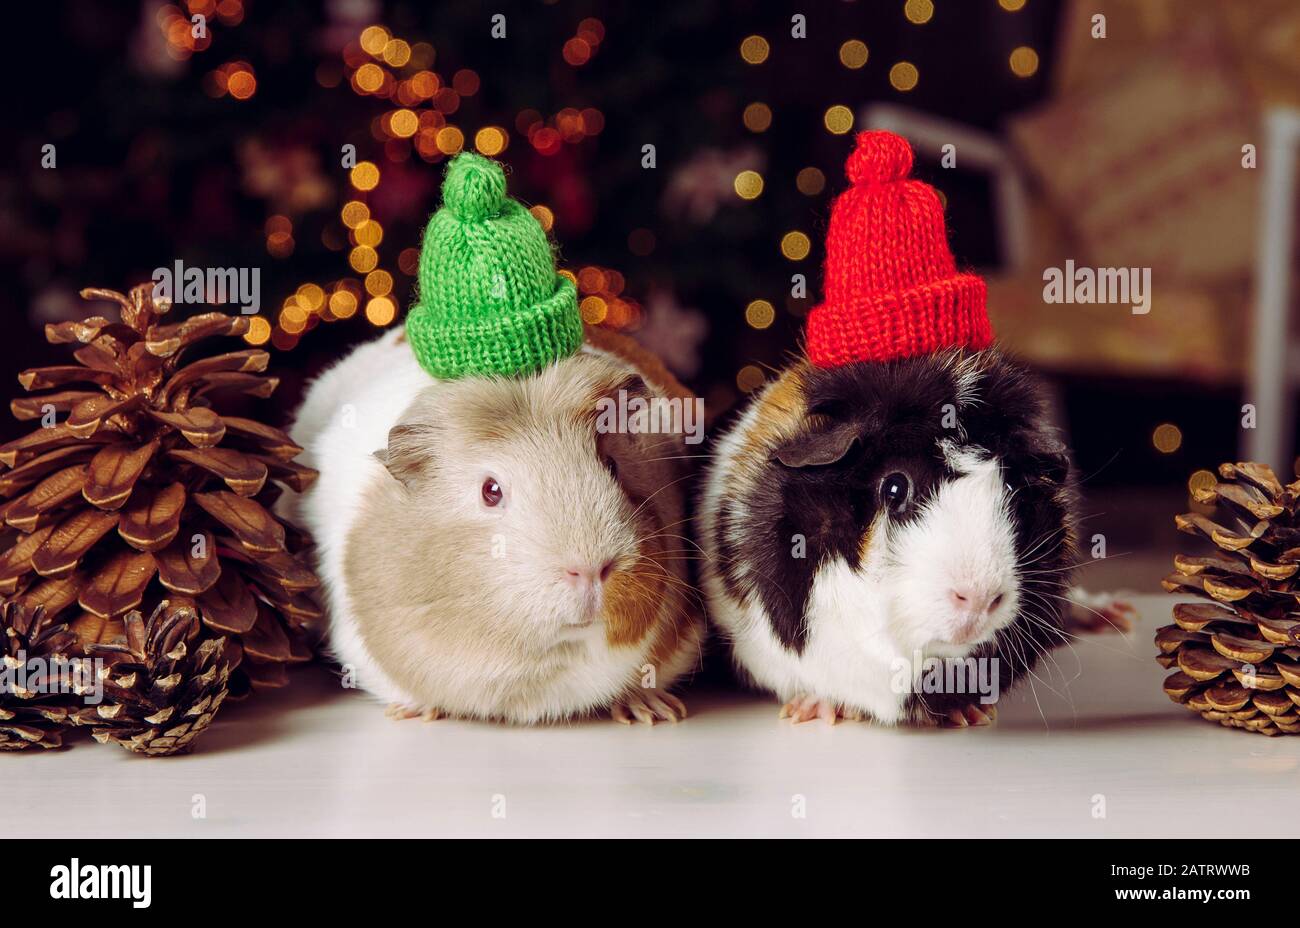 Two cute little Domestic guinea pigs (Cavia porcellus), also known as cavy or domestic cavy on Christmas lights background indoors in winter. Wearing Stock Photo